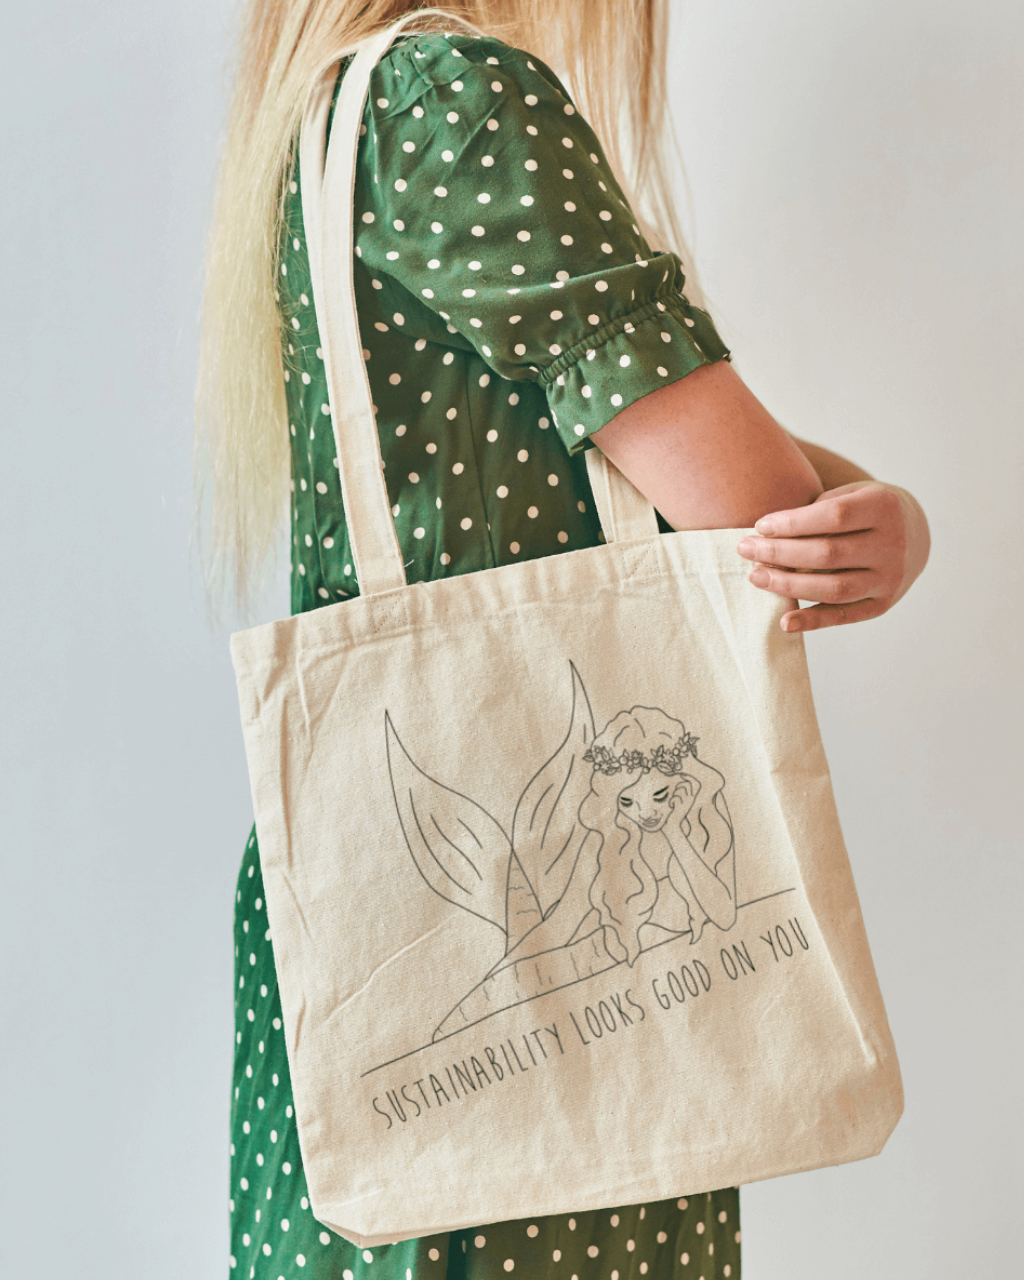 Tide and Seek Sustainable Swimwear Tote bag in studio setting on faceless model in a green dress wearing the bag on her shoulder.